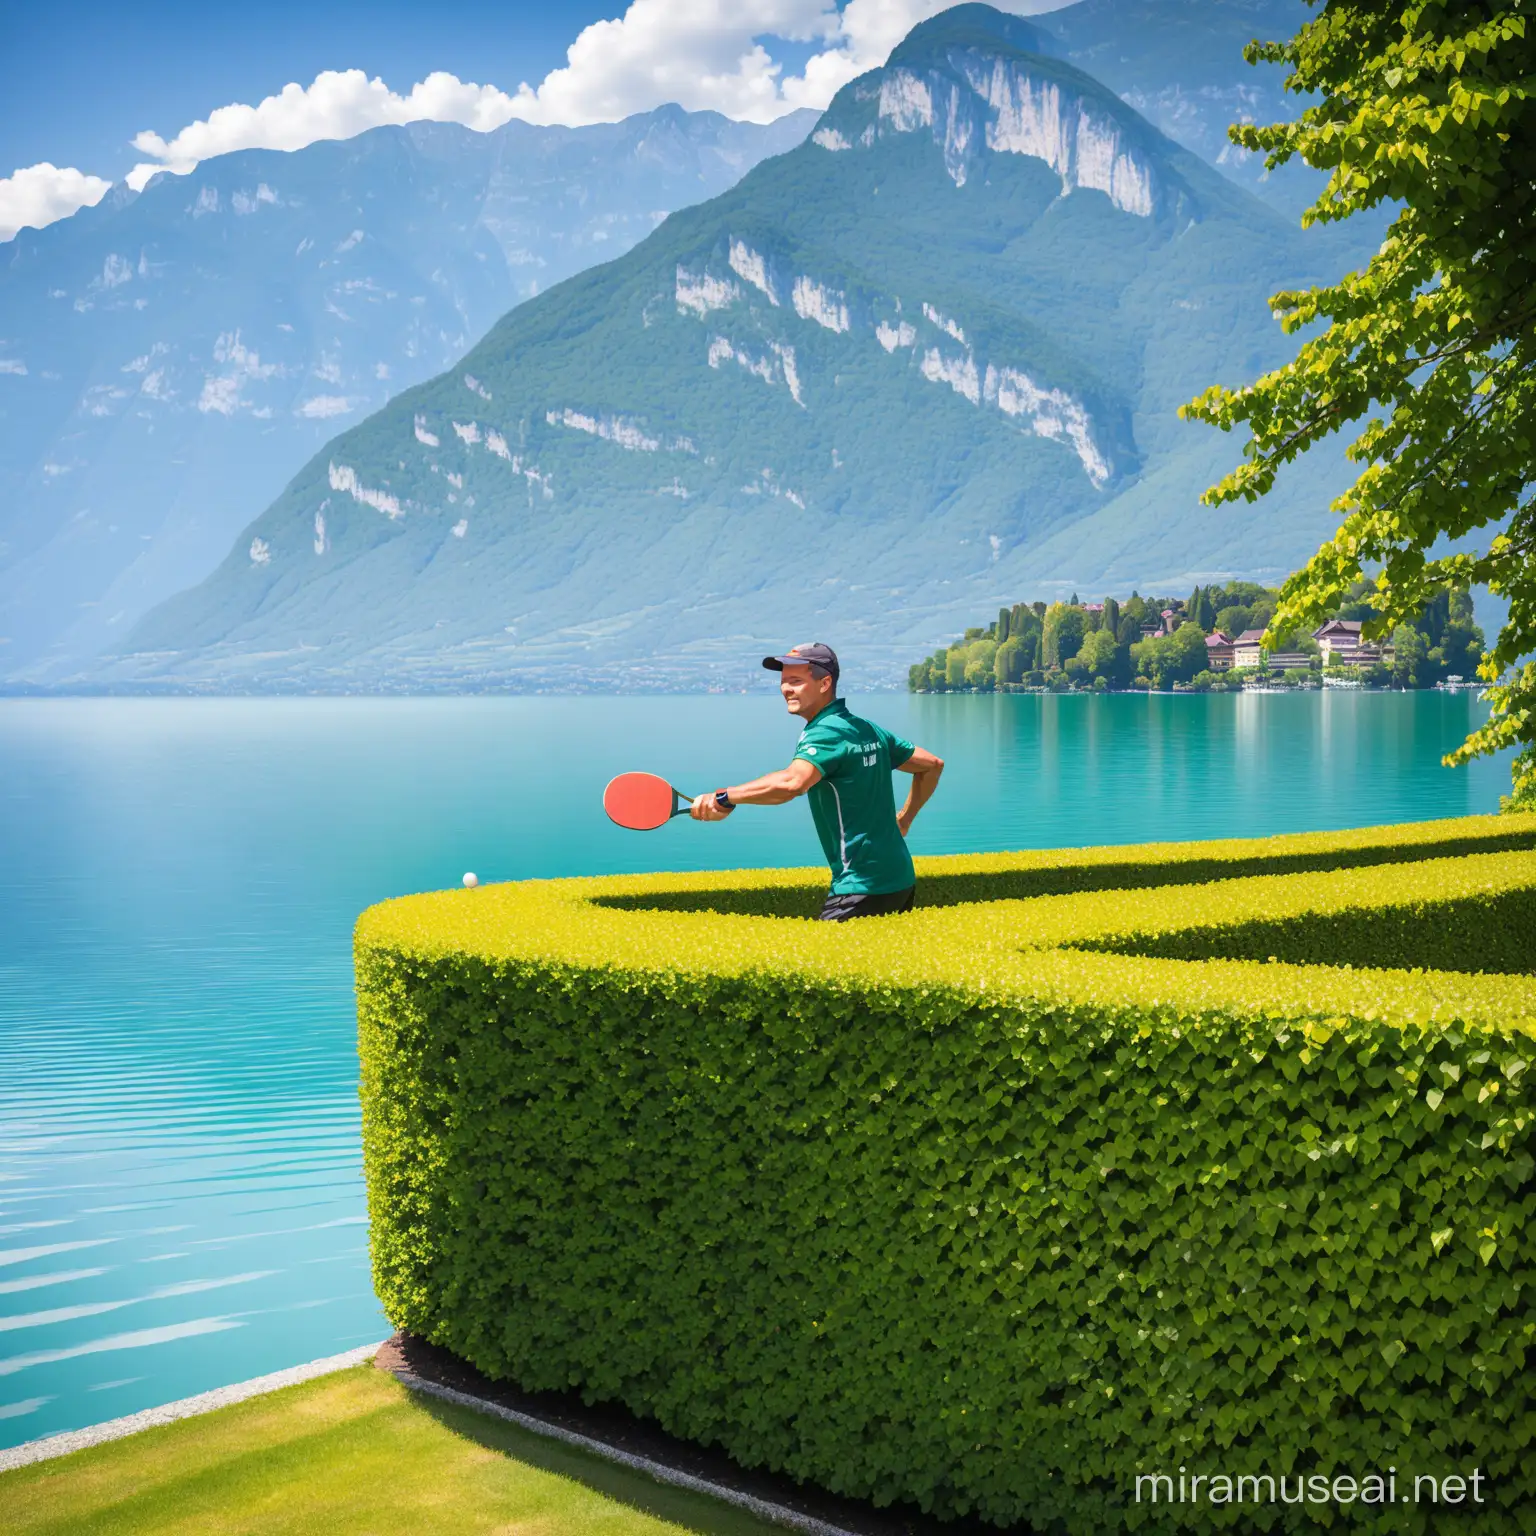 Professional Landscaper Trimming Hedge by Lake Annecy with Table Tennis Racket